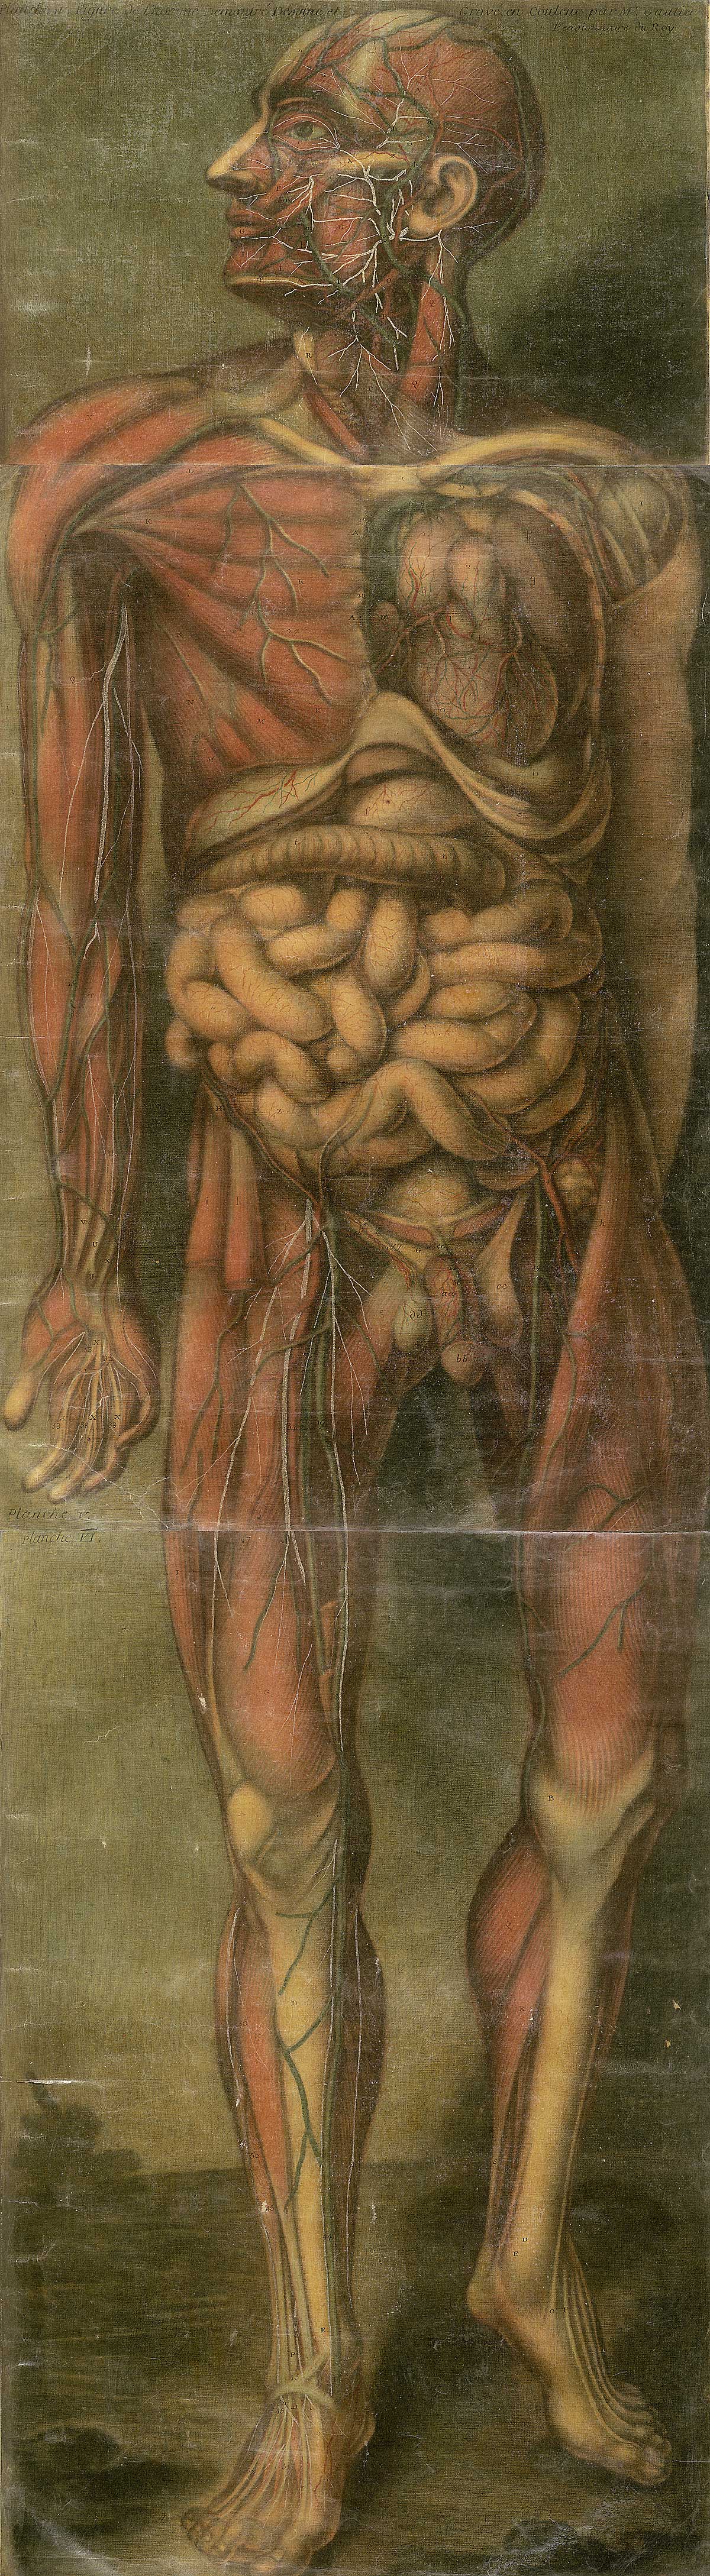 Large color mezzotint of a facing male figure with head turned to the left and showing in profile with flesh removed to reveal the muscles, circulatory system, internal organs, and reproductive system; from Jacques Fabian Gautier d’Agoty’s Anatomie générale des viscères en situation, NLM Call no.: WZ 260 G283c 1745.